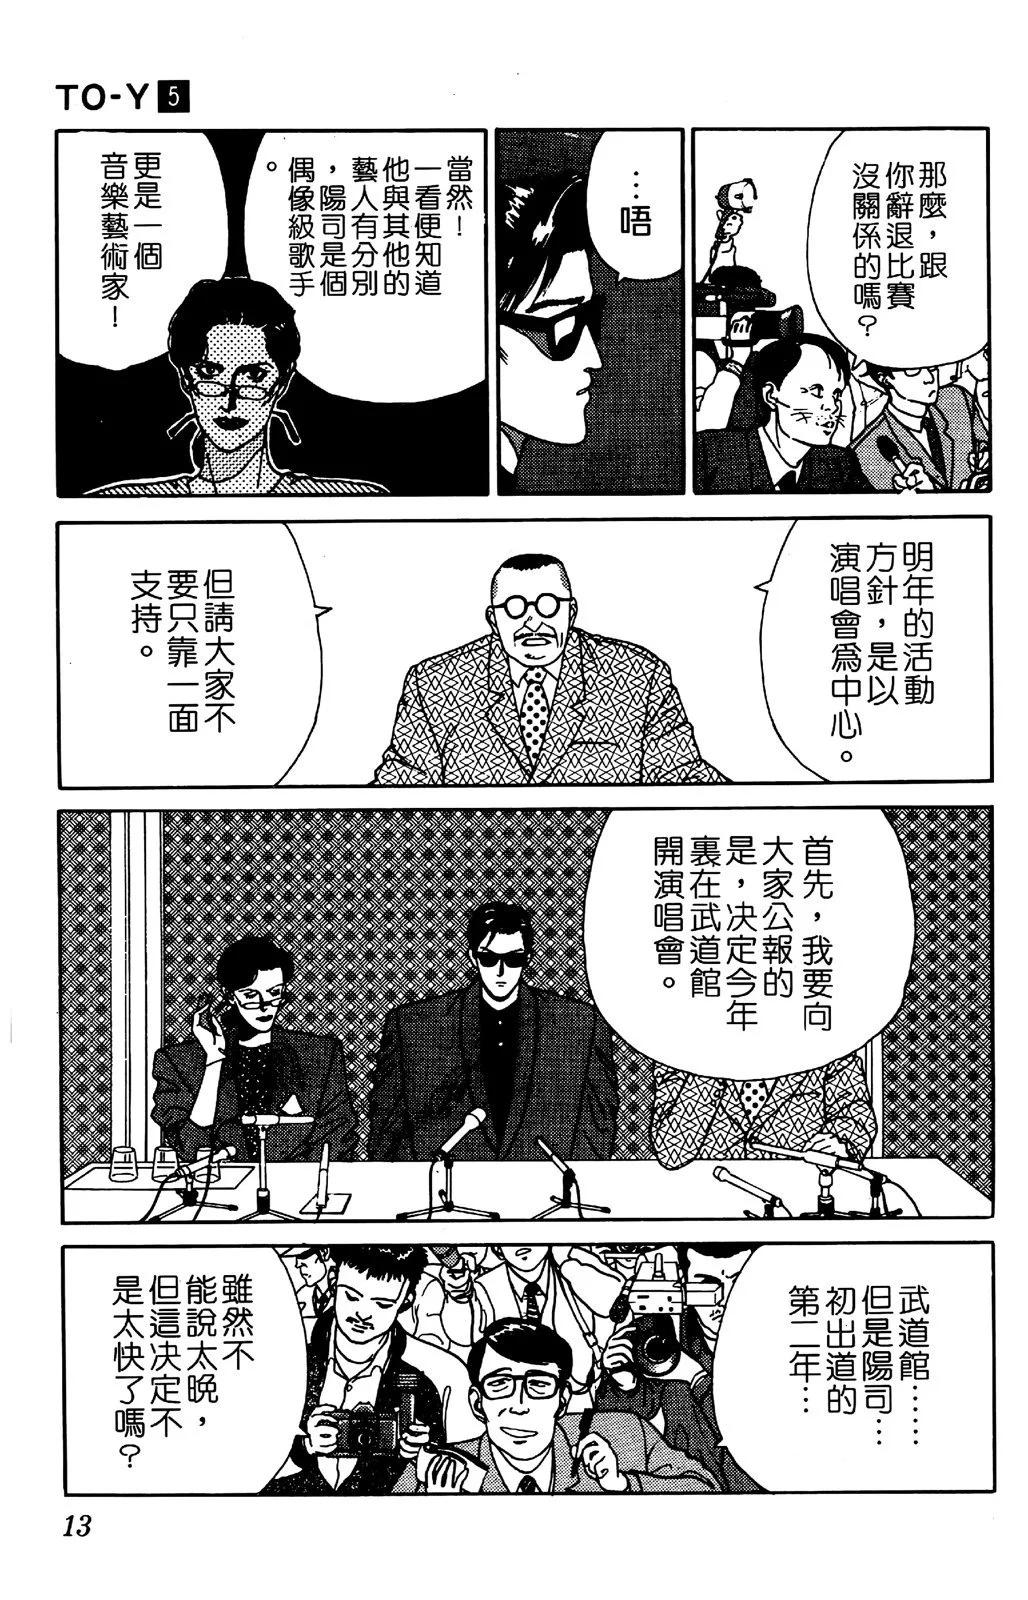 TO-Y - 第05卷(1/4) - 8